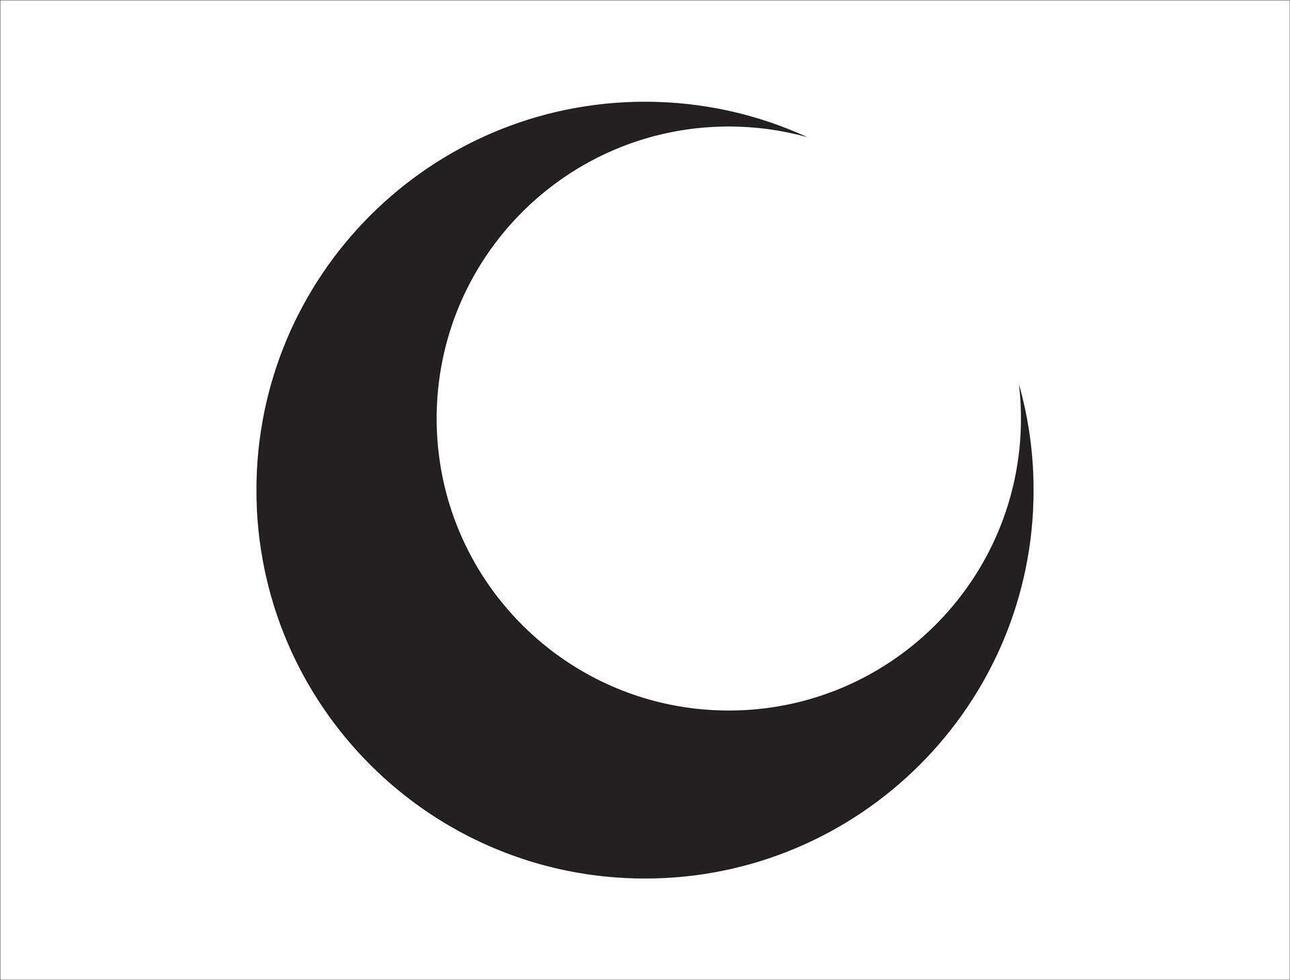 Crescent moon silhouette on white background vector